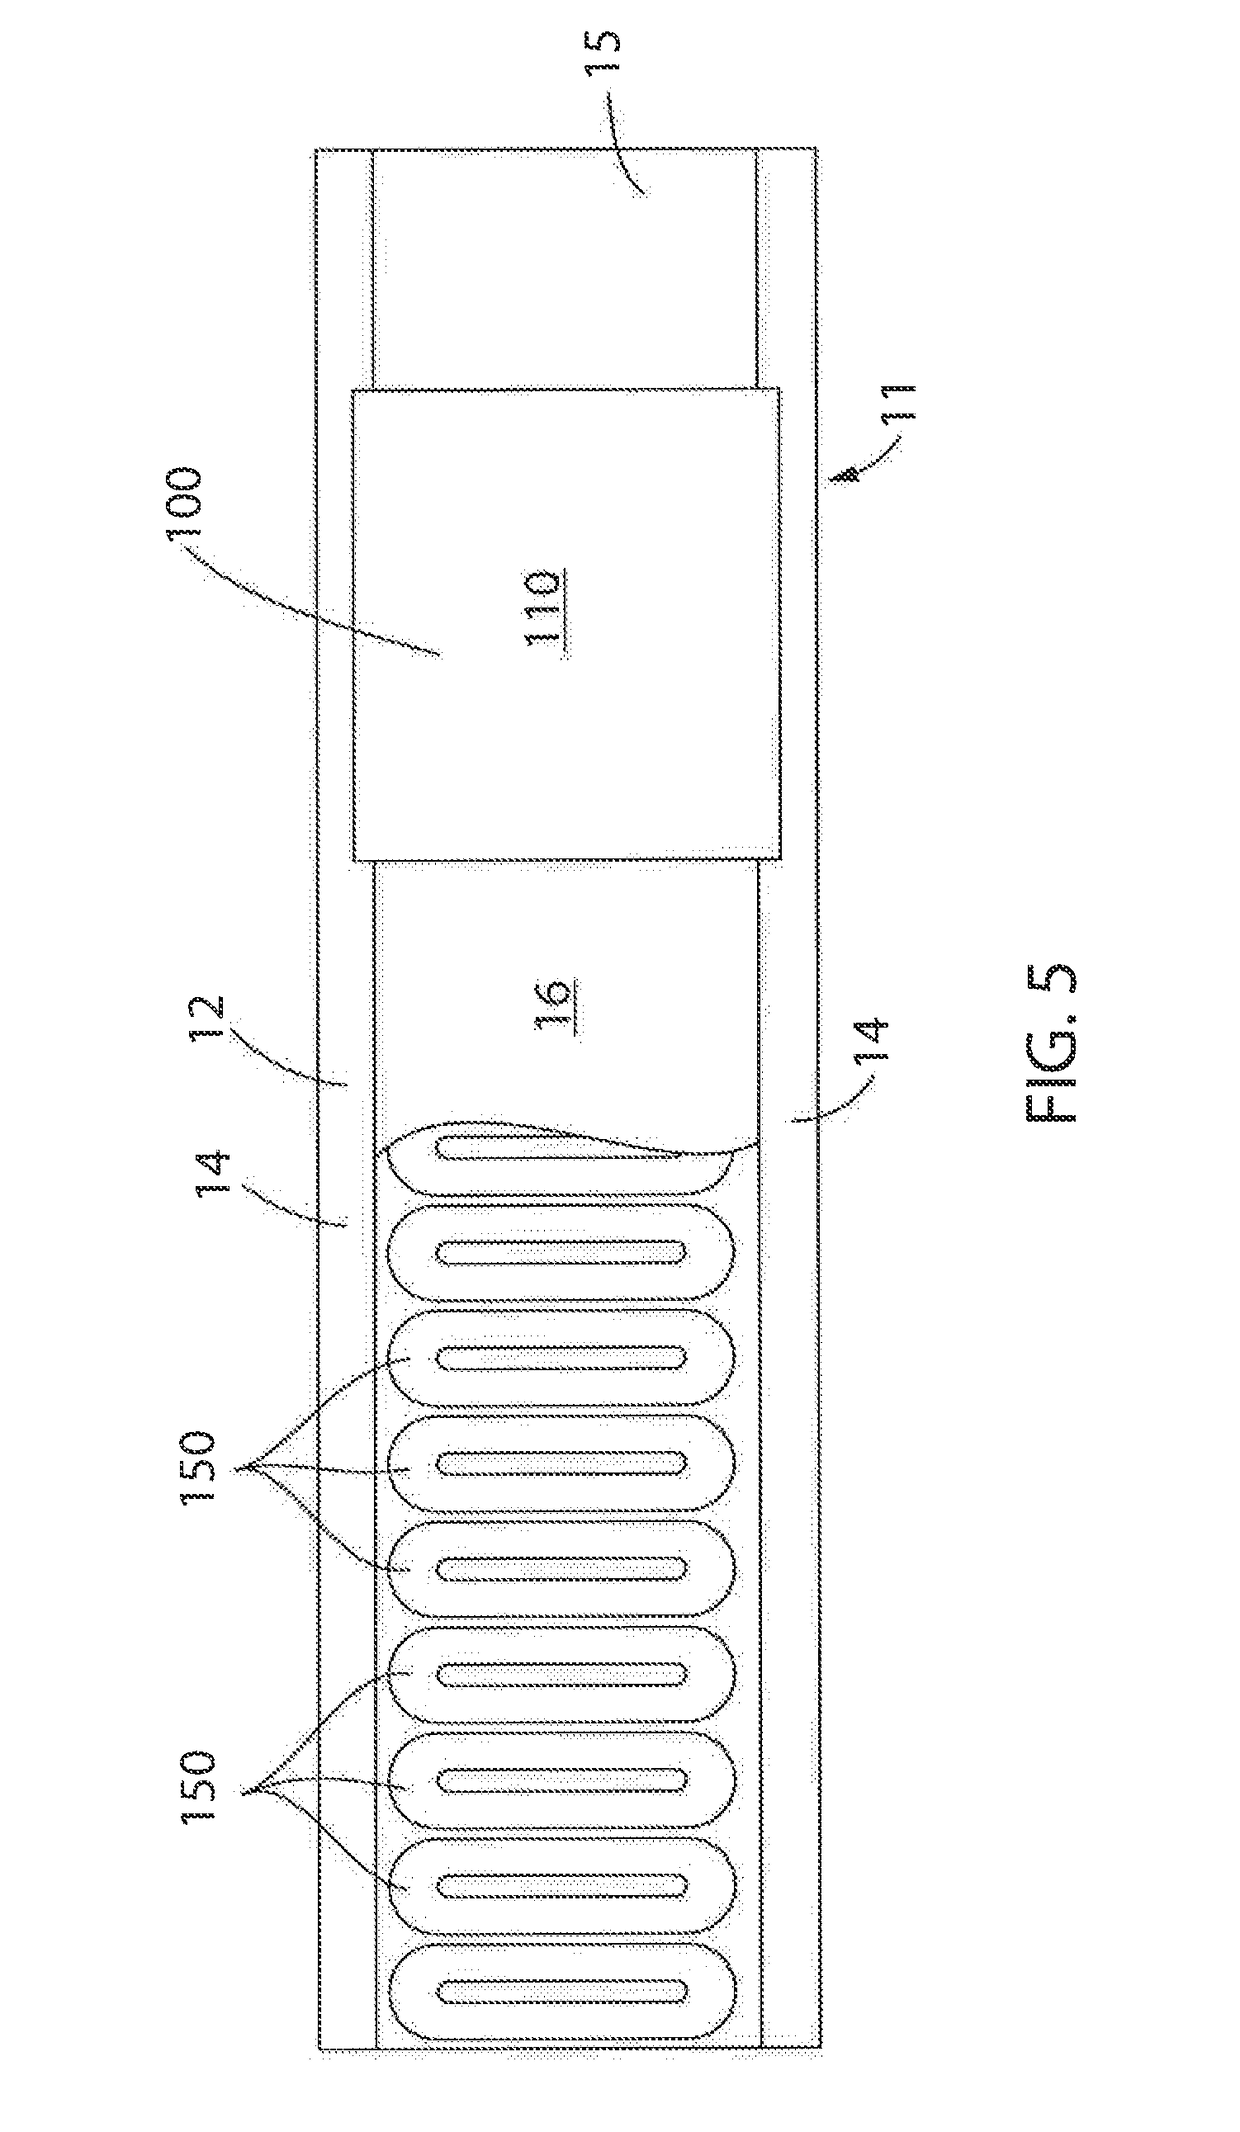 Linear Drive System Having Central, Distributed and Group Control